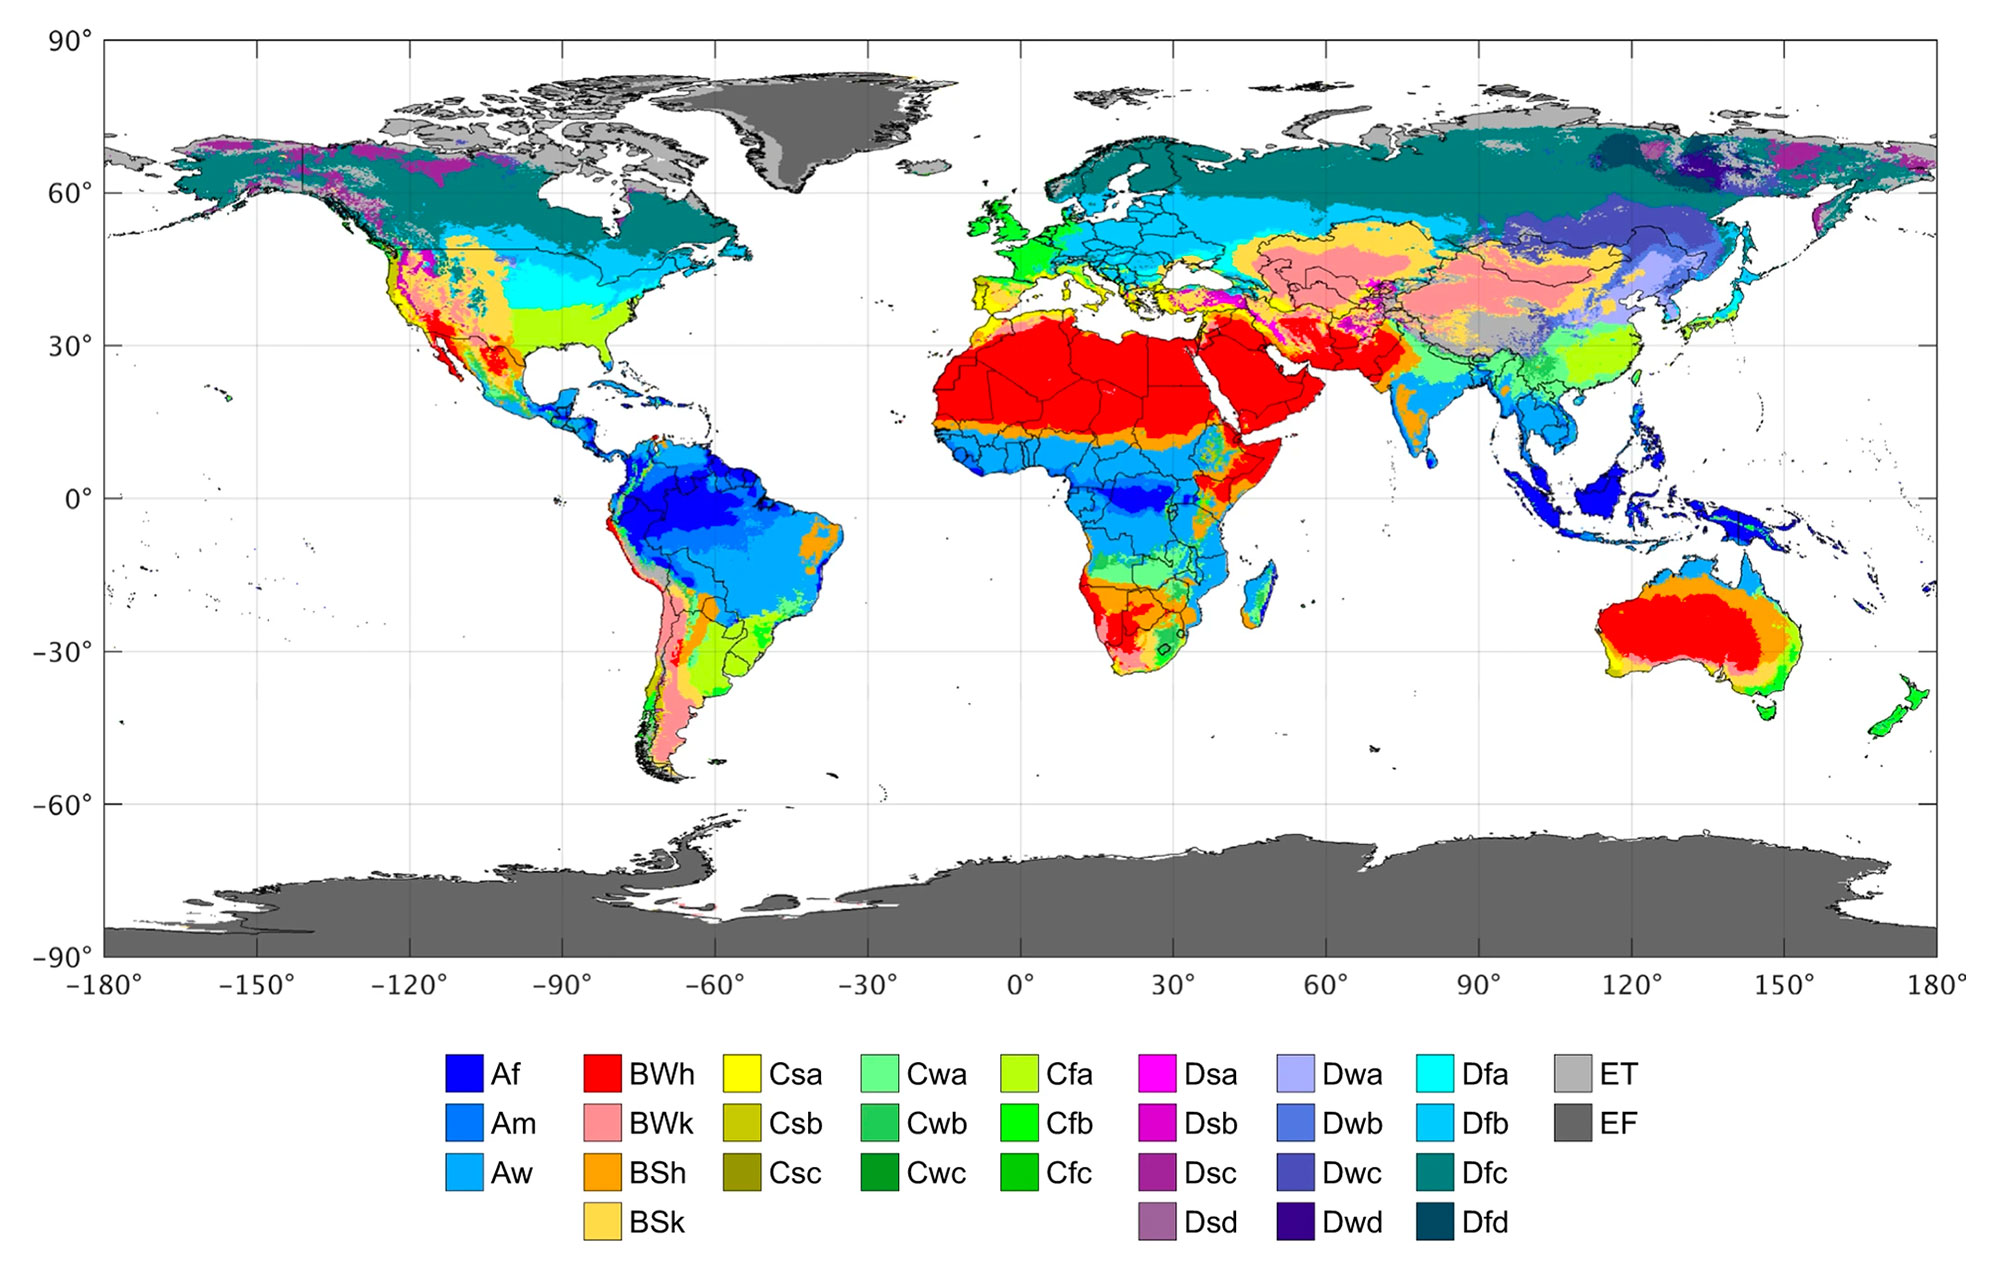 World Koppen-Geiger map showing climate zones for 1980 to 2016.